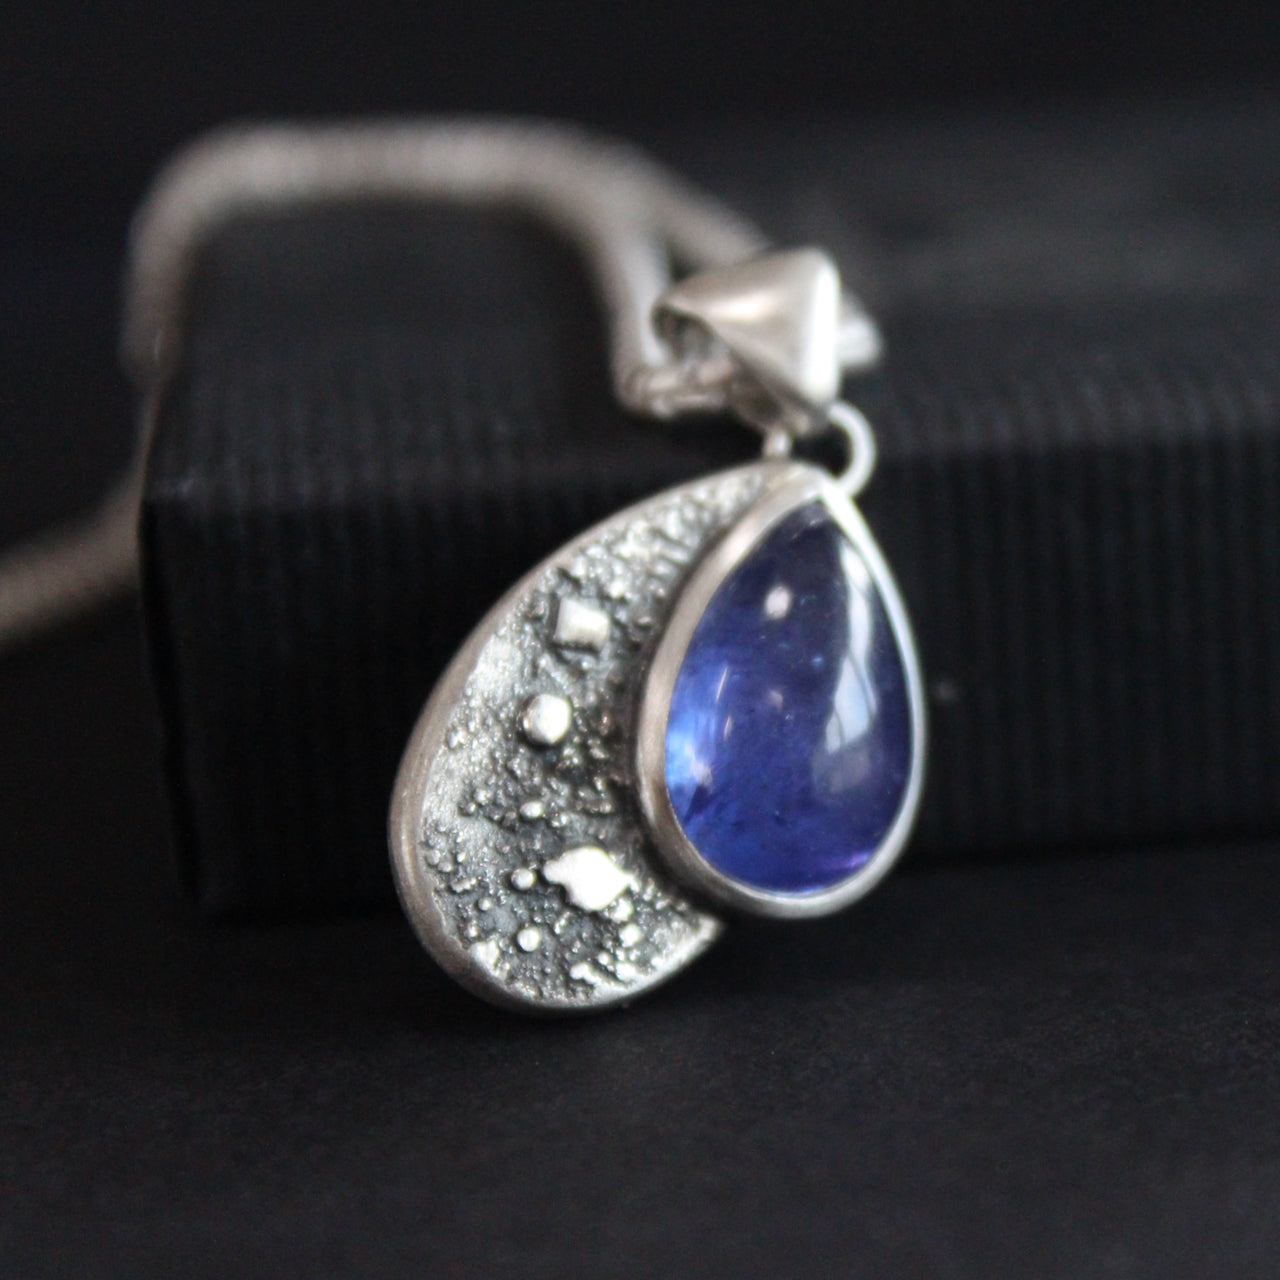 Carin Lindberg pendant of a teardrop textured silver and blue stone on a silver chain